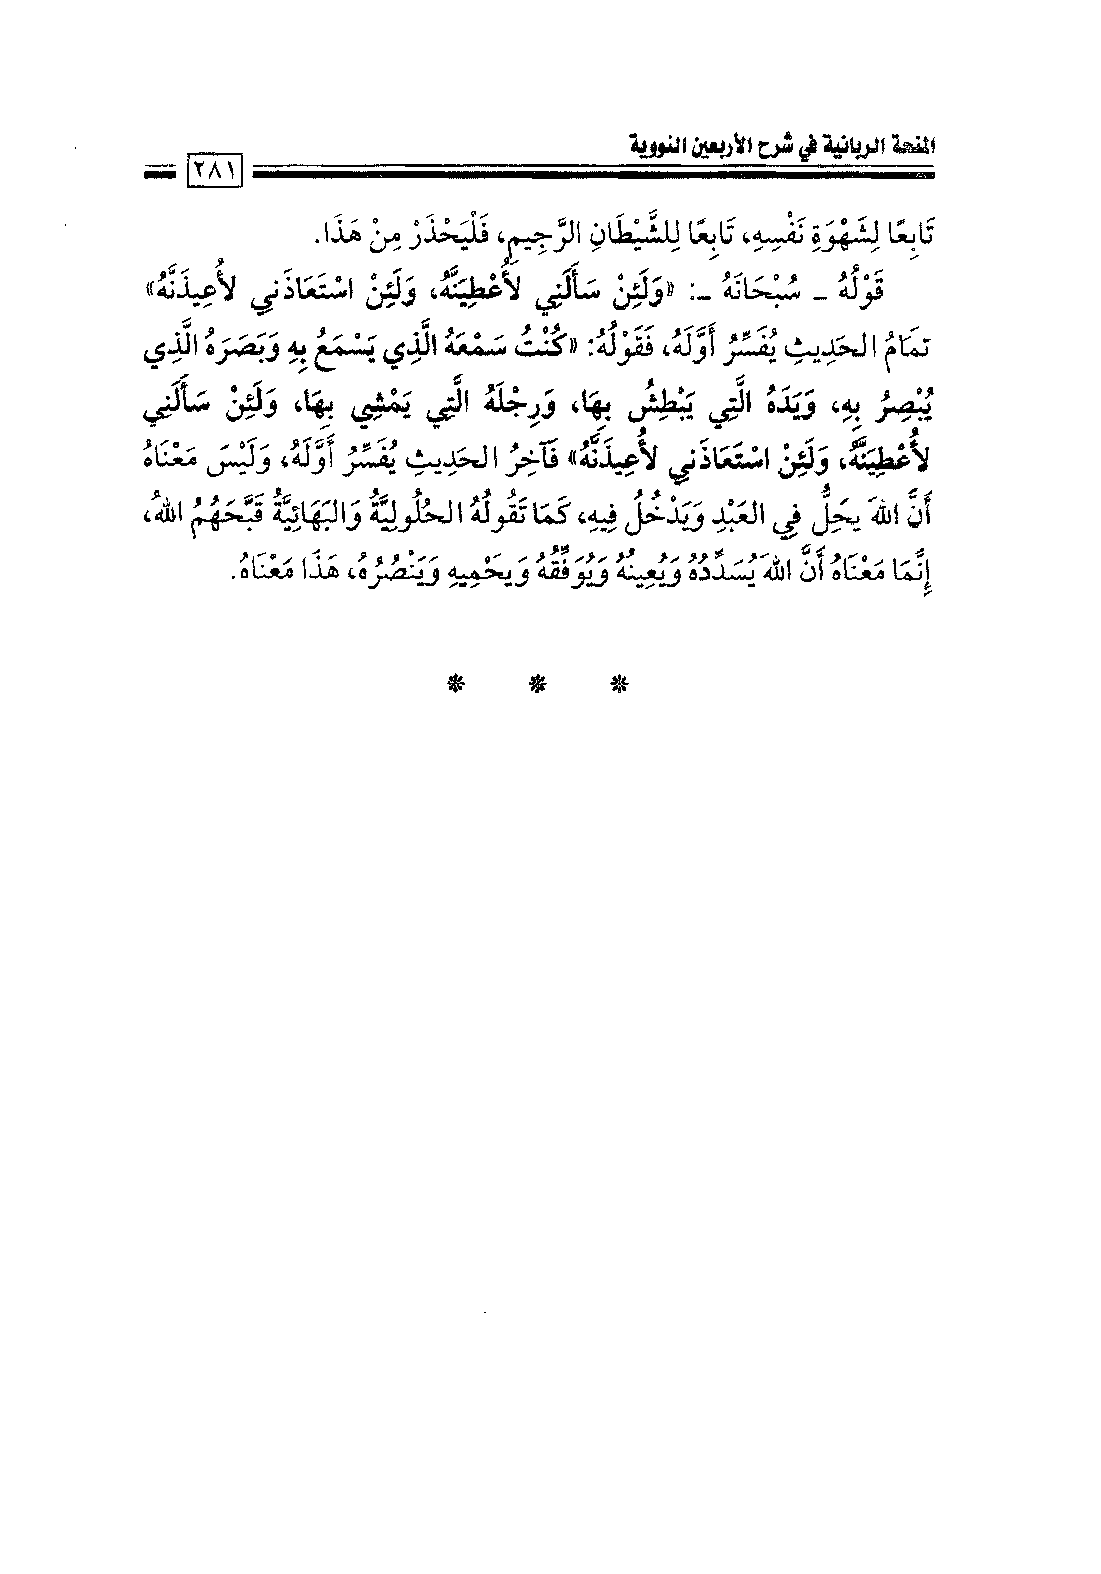 Page 283